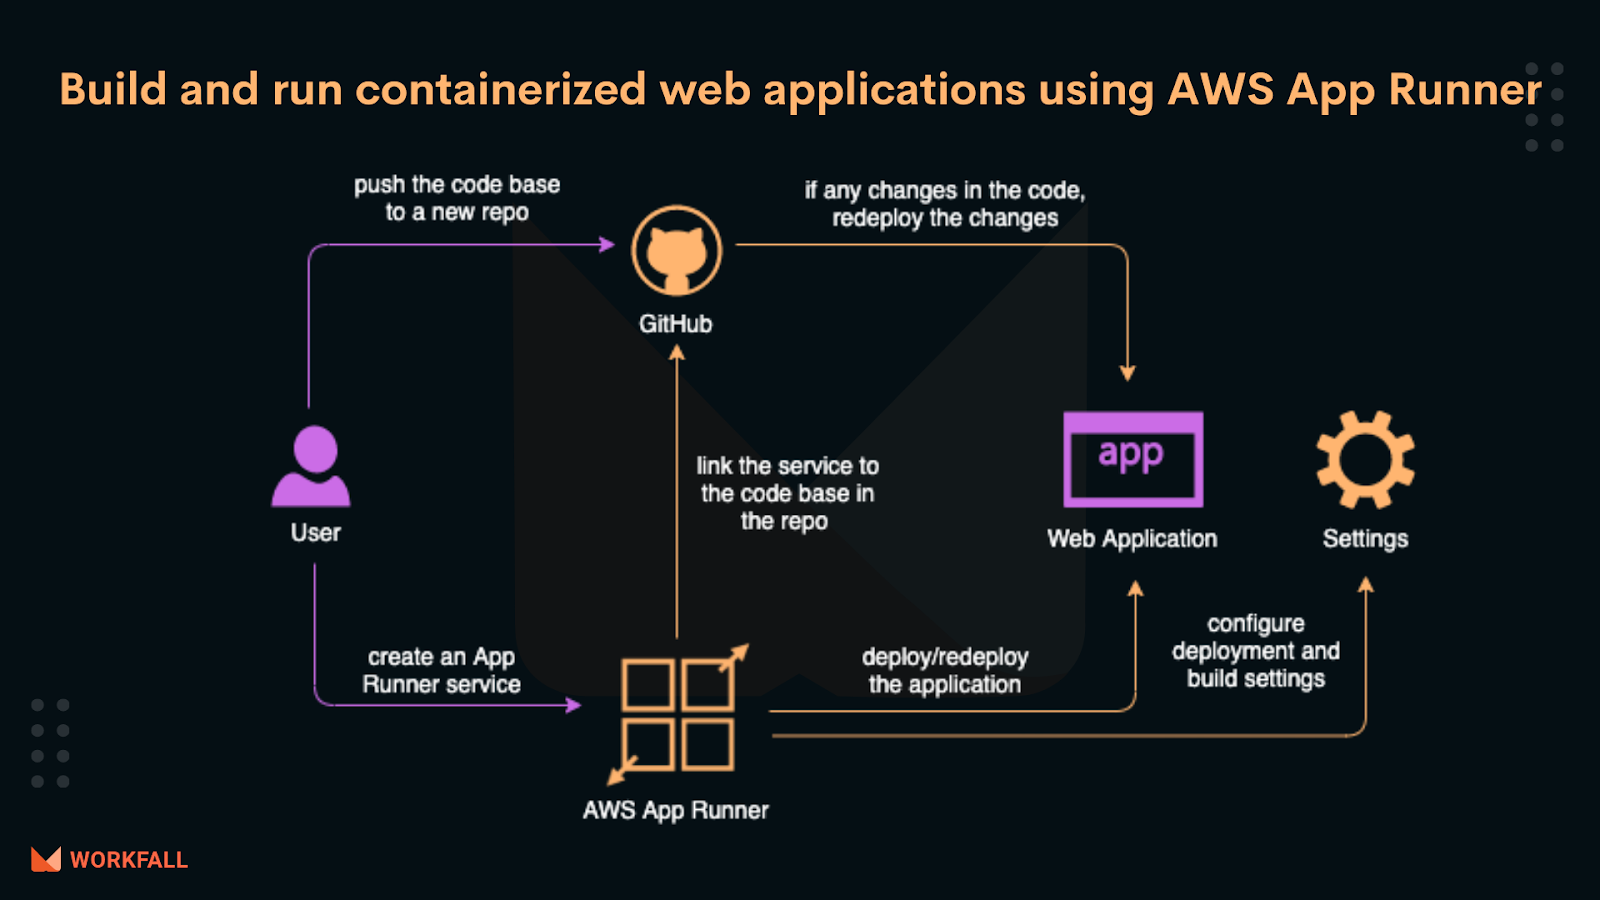 How to deploy a scalable and secure web application in minutes using AWS App Runner?